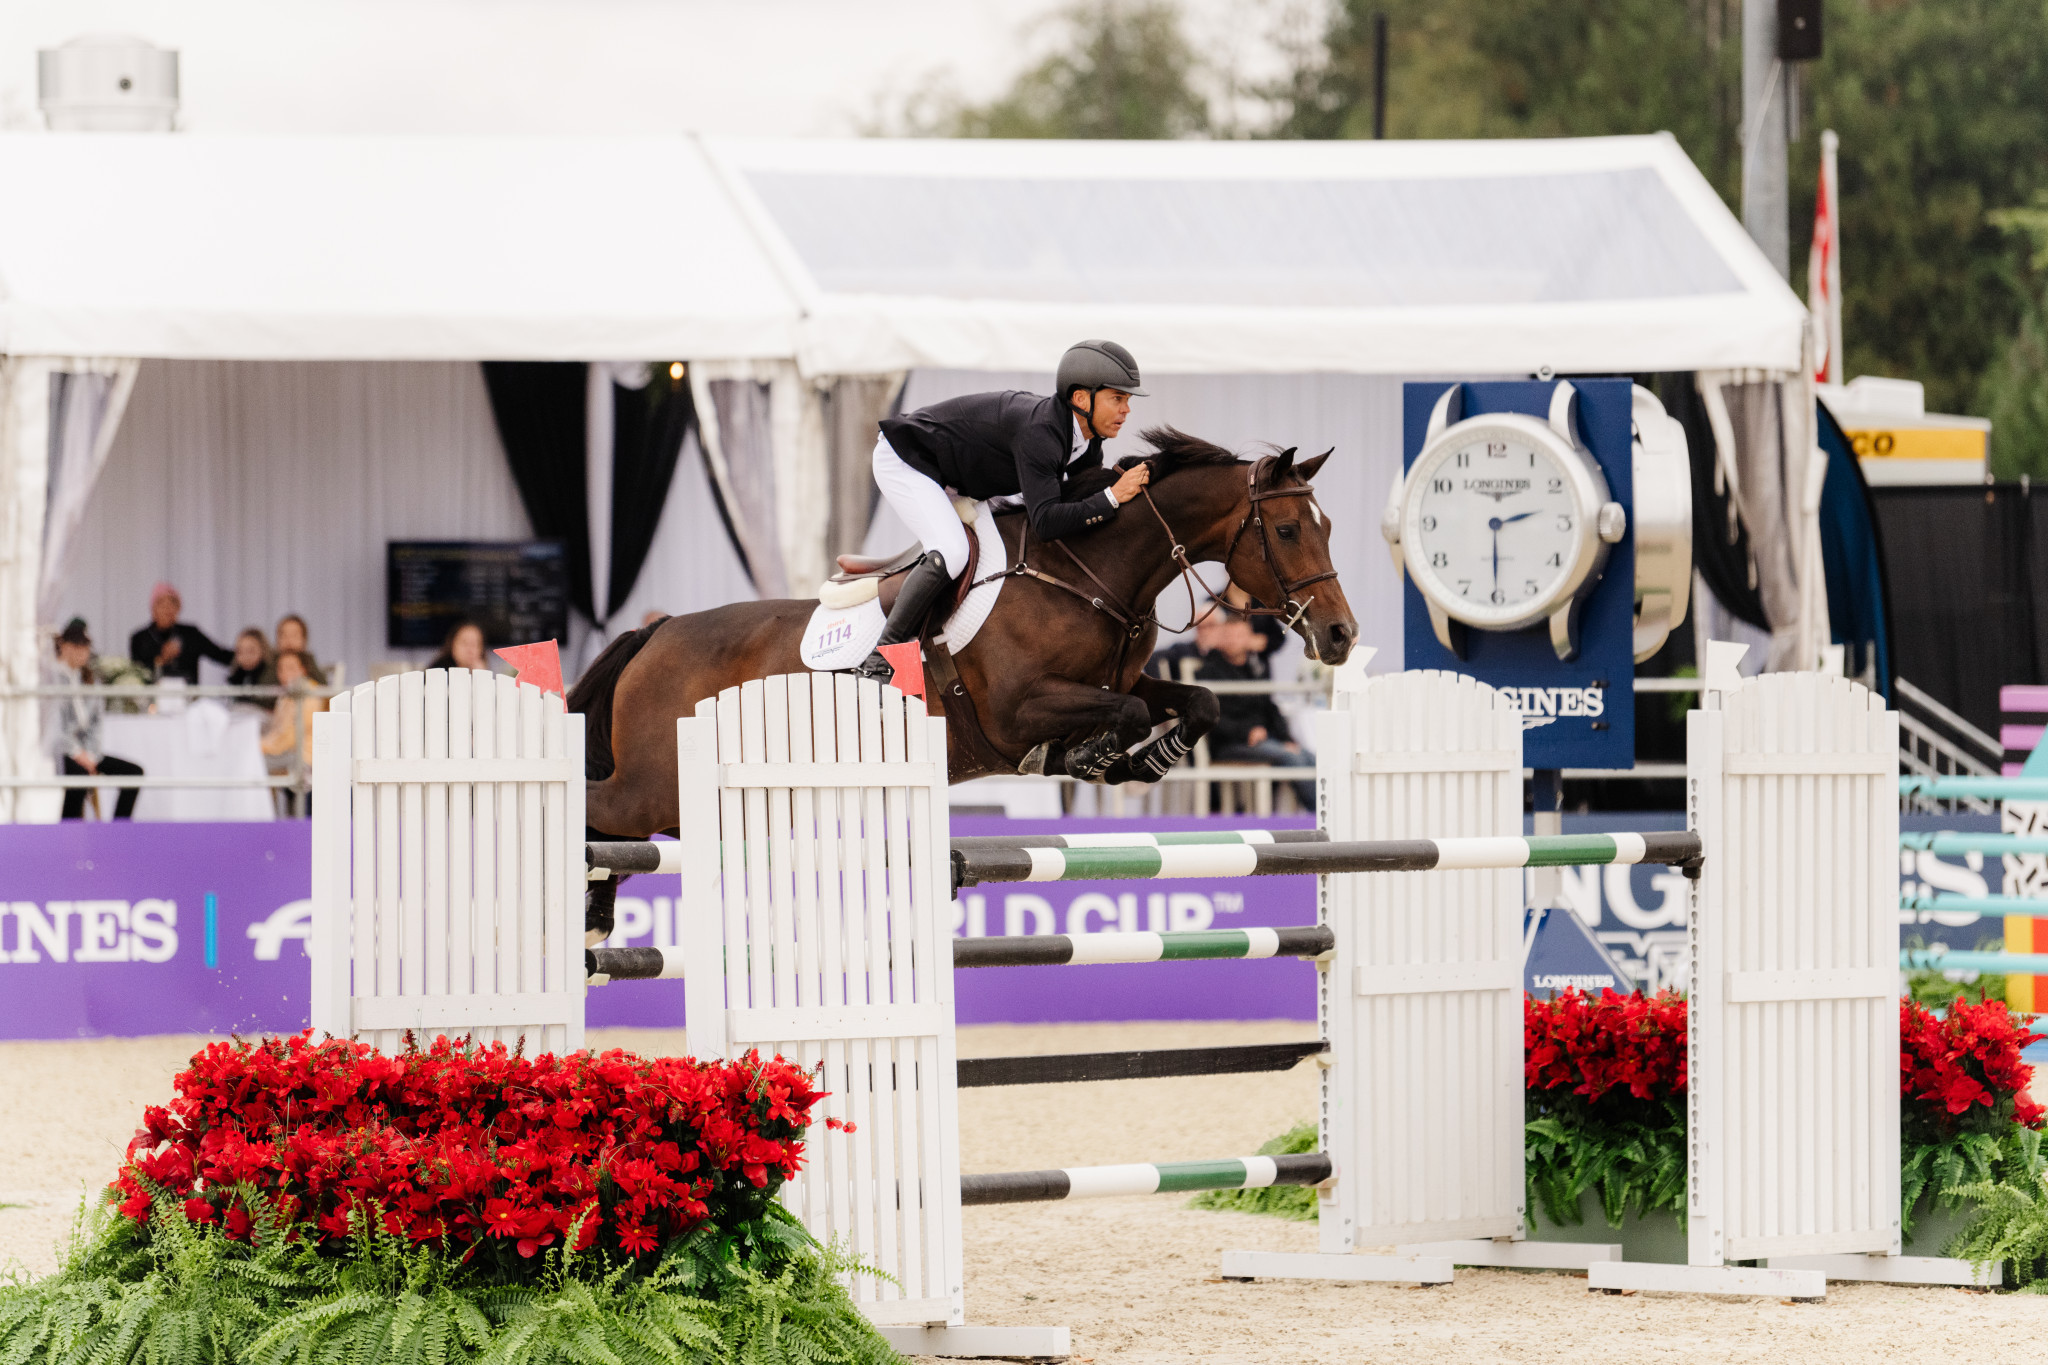 Kent Farrington finished in third after seeing the final hurdle fall in the jump-off, which cost him the victory having otherwise produced the fastest ride ©FEI